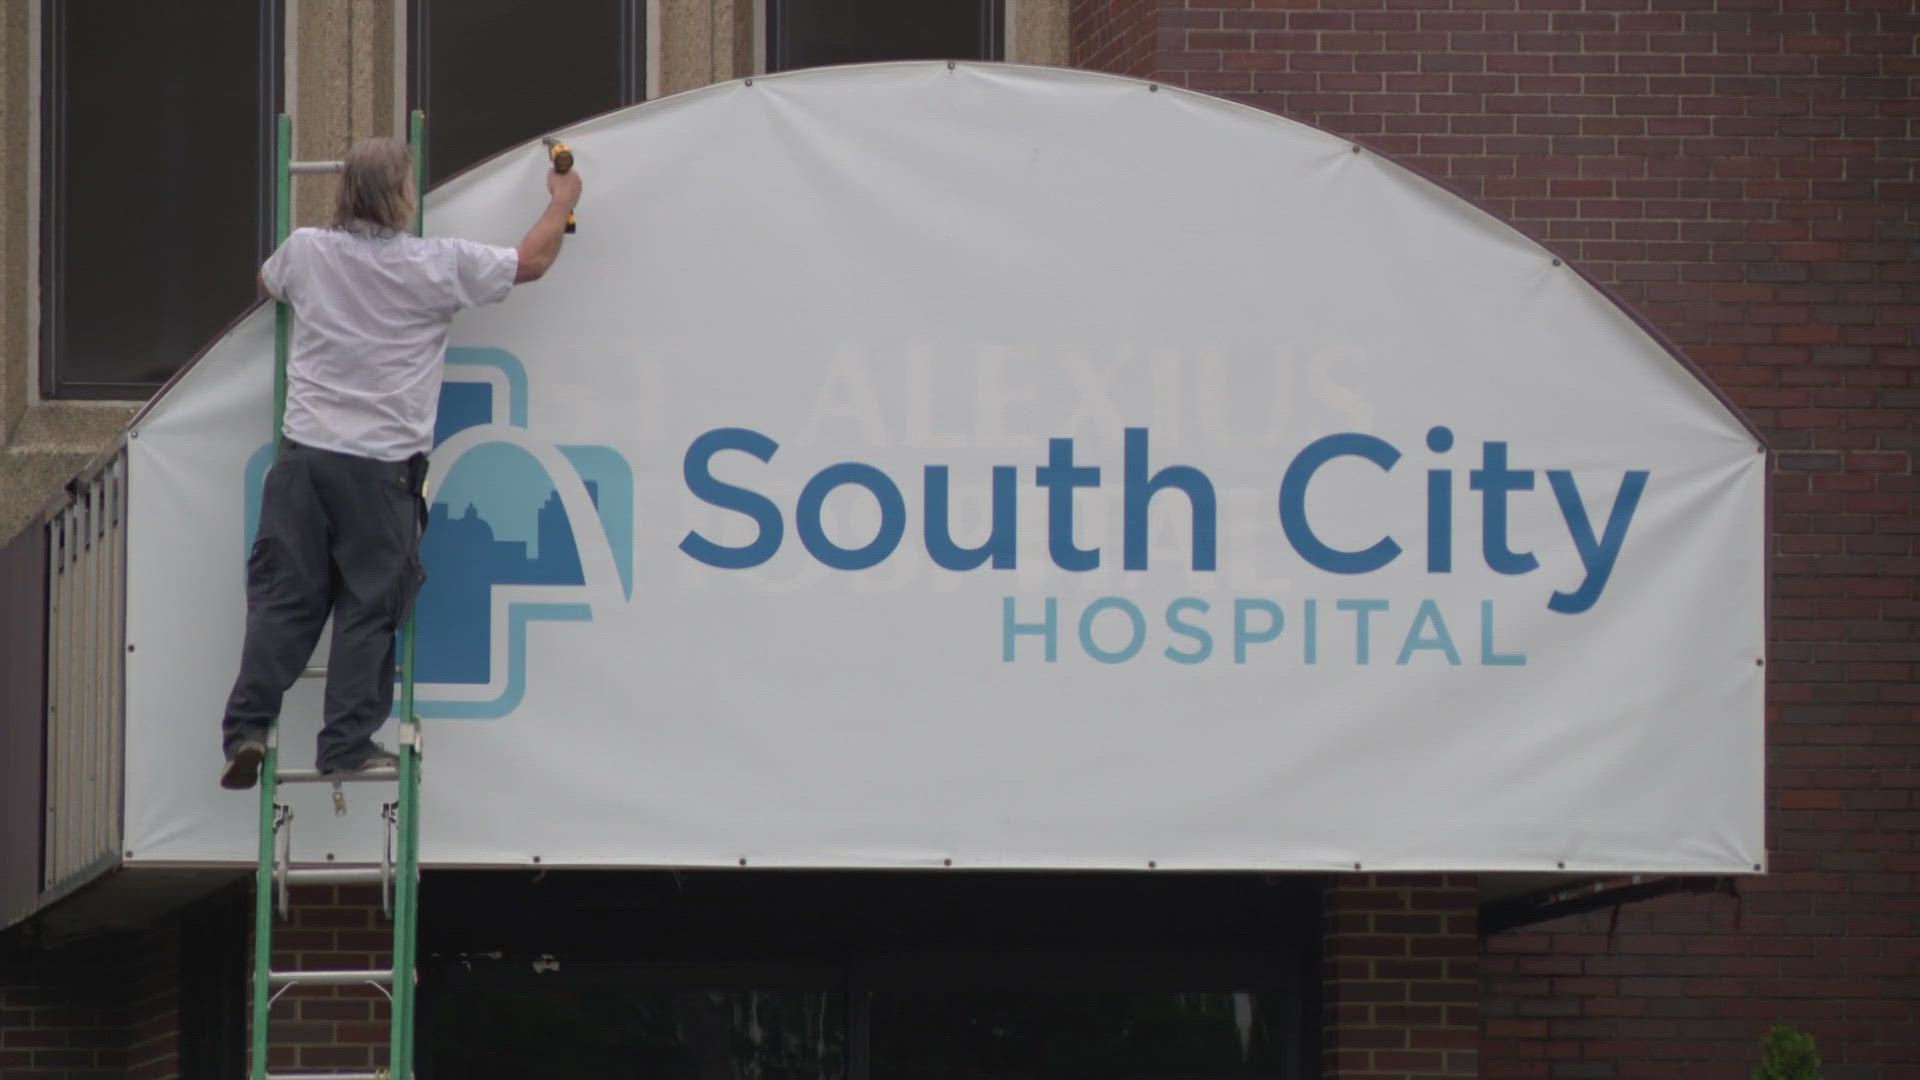 South City Hospital, formerly known as St. Alexius, is closing after battling financial troubles for years. Now the 154-year-old hospital is shutting its doors.